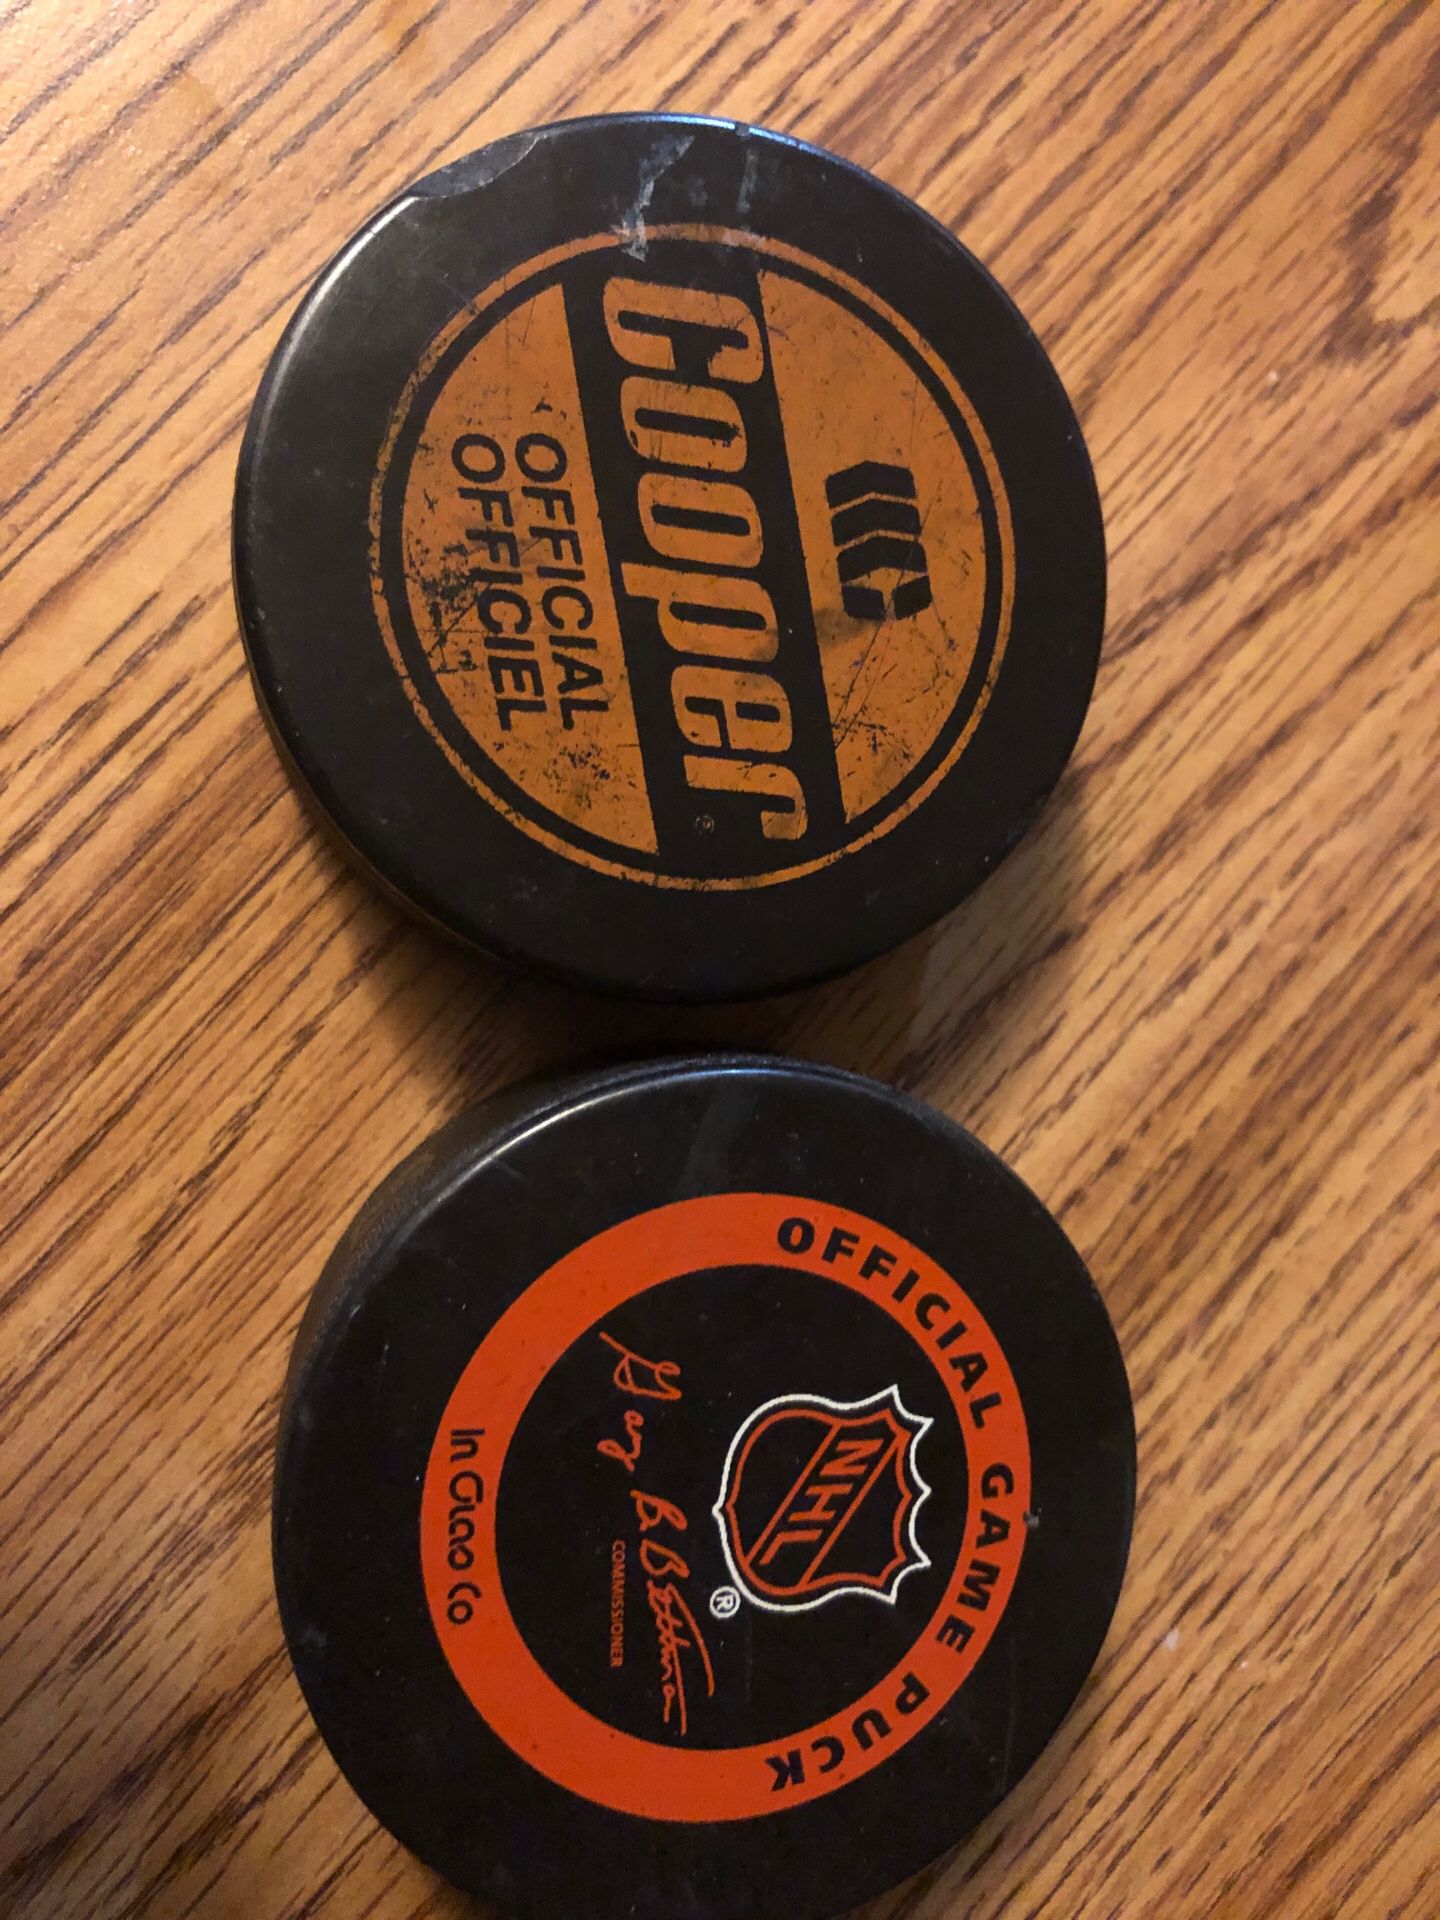 Two real hockey pucks used for game